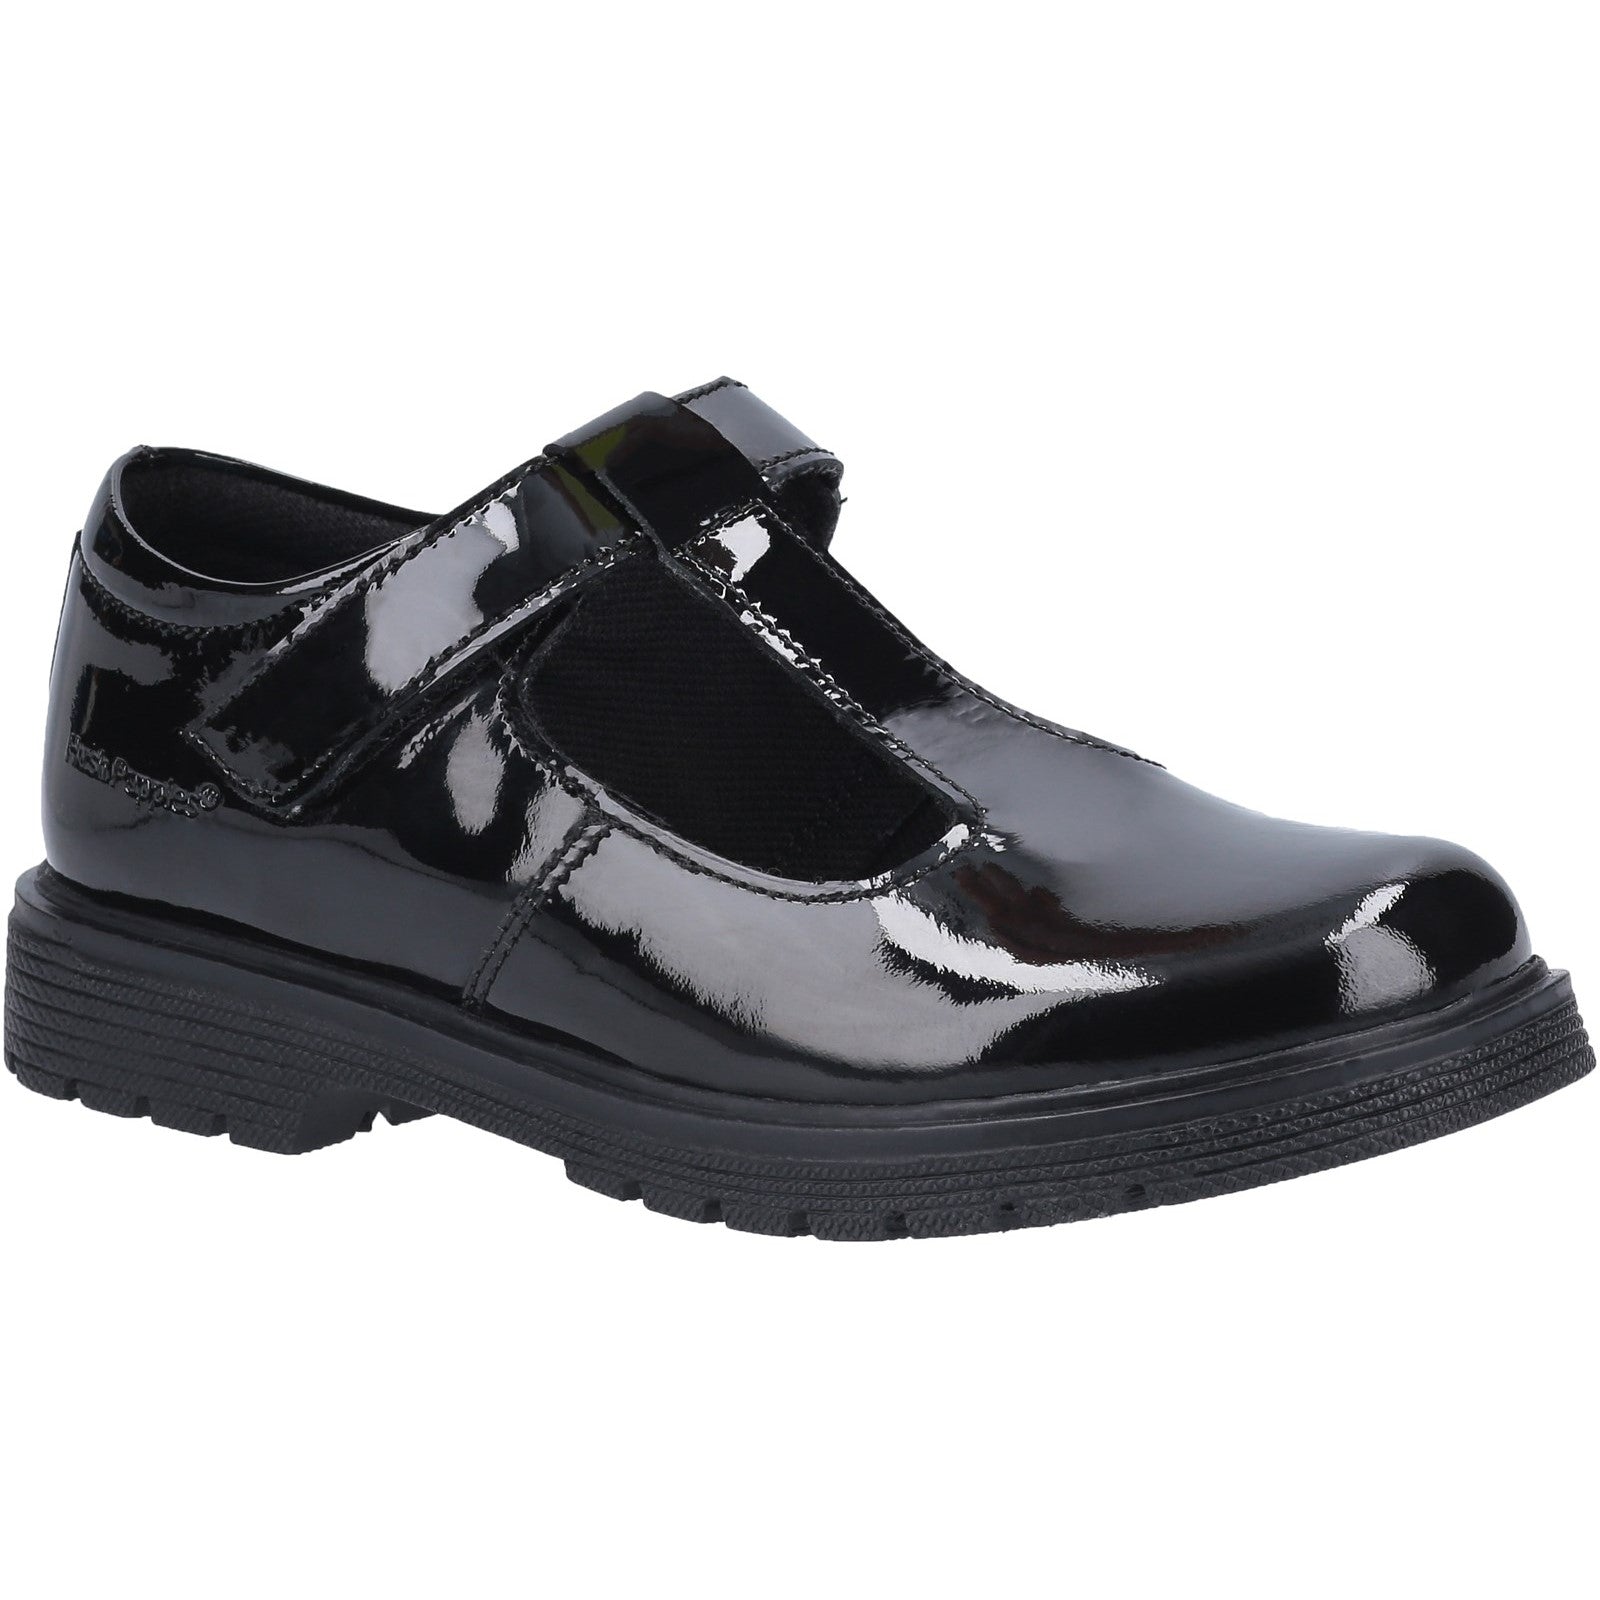 Hush Puppies Girls Gracie Patent Leather School Shoes - Black